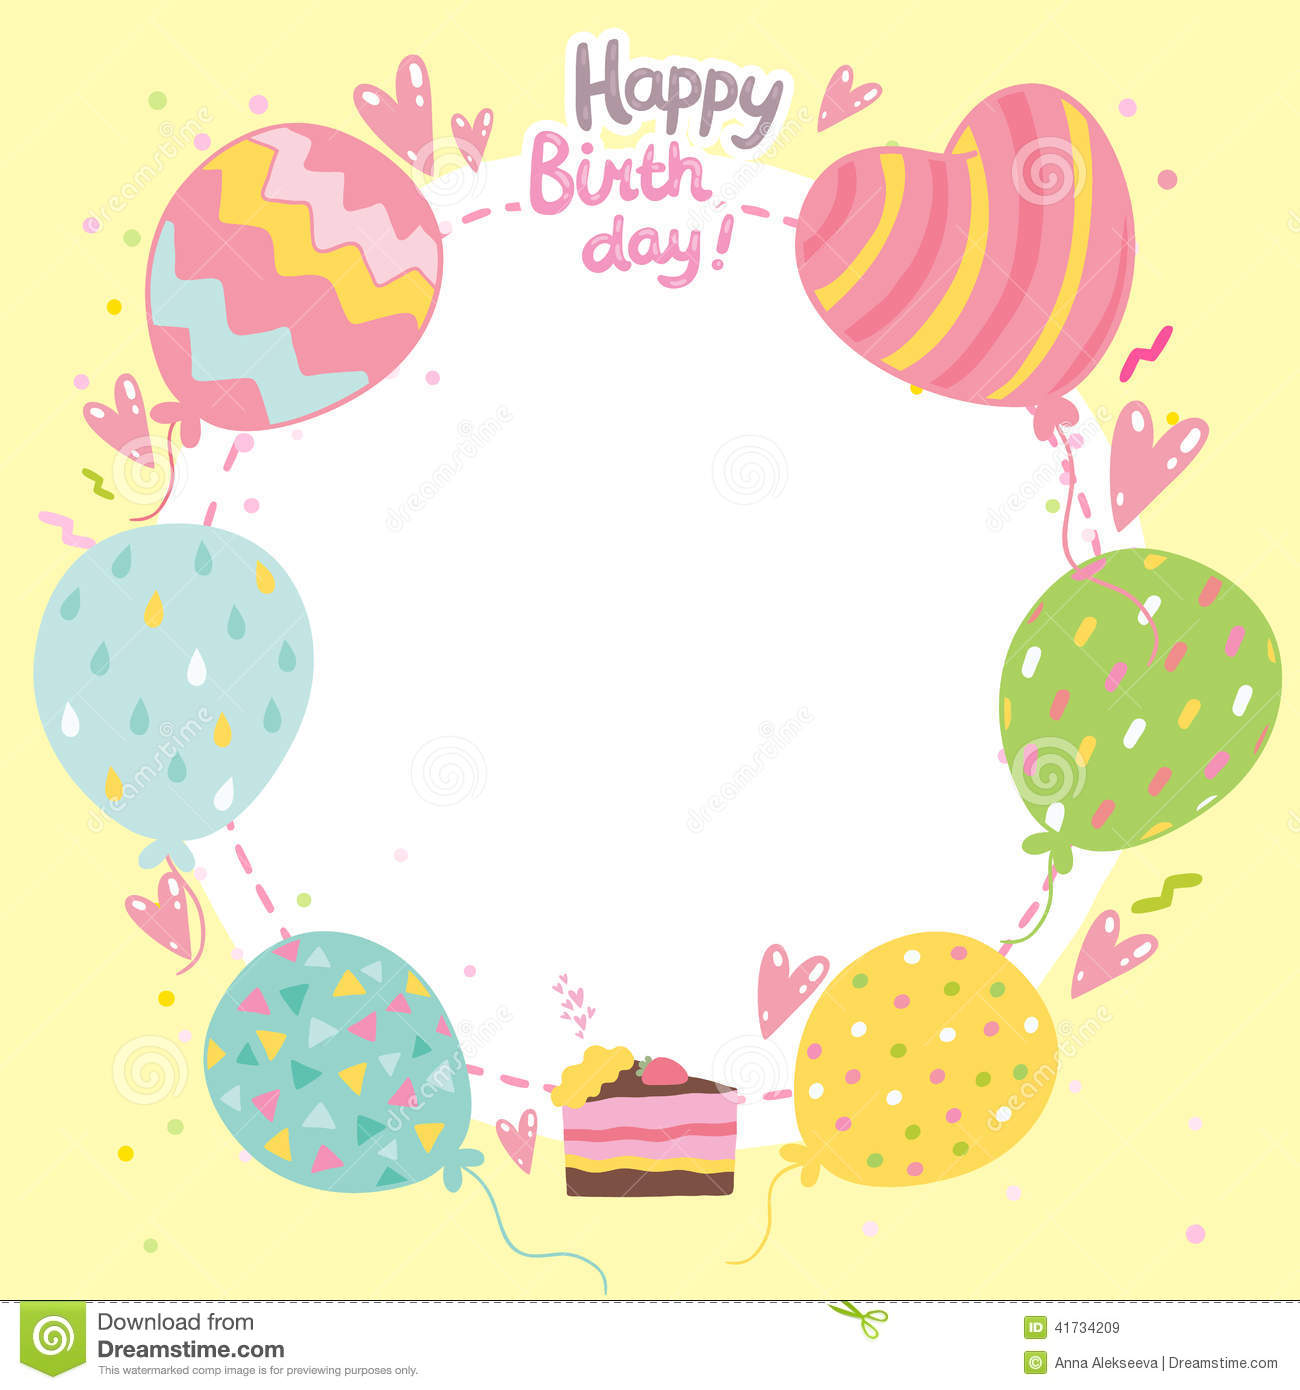 48-lister-over-free-printable-happy-birthday-templates-free